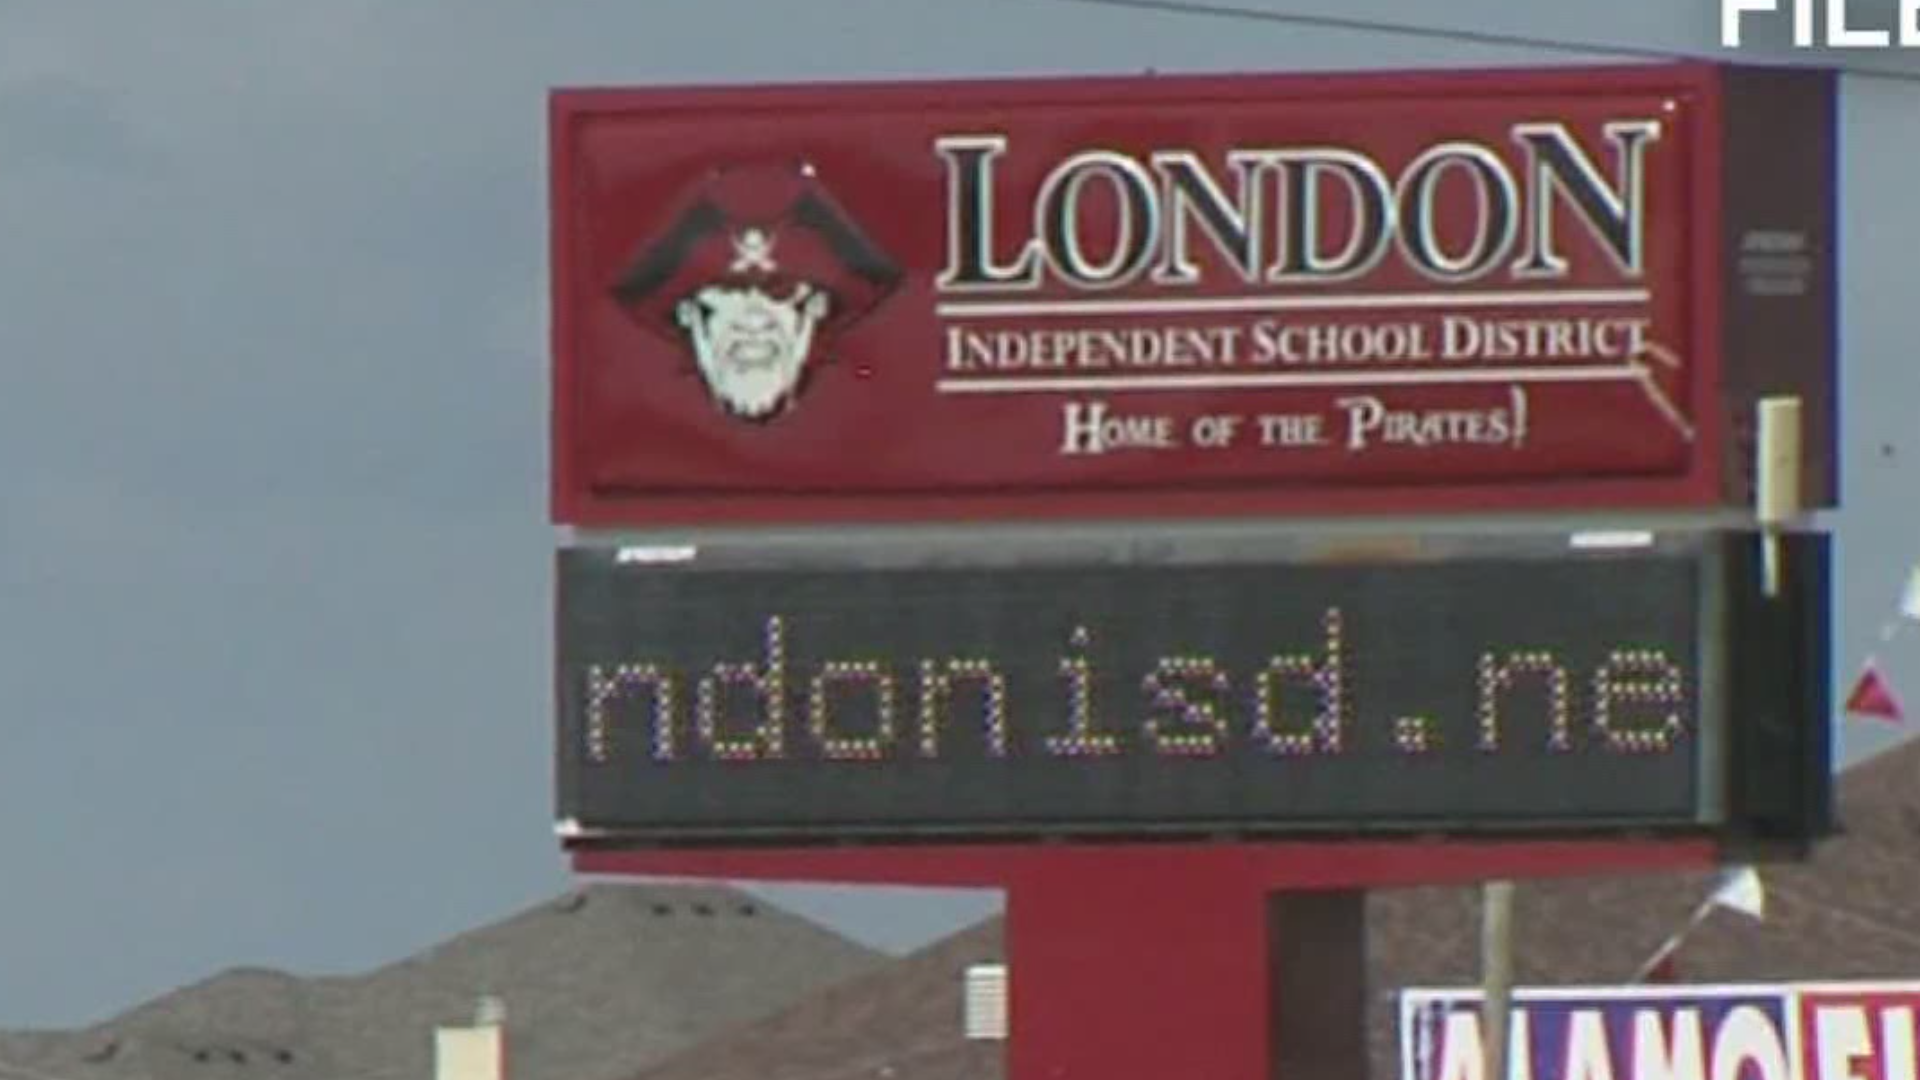 Students at London ISD return to school on Wednesday, July 29.